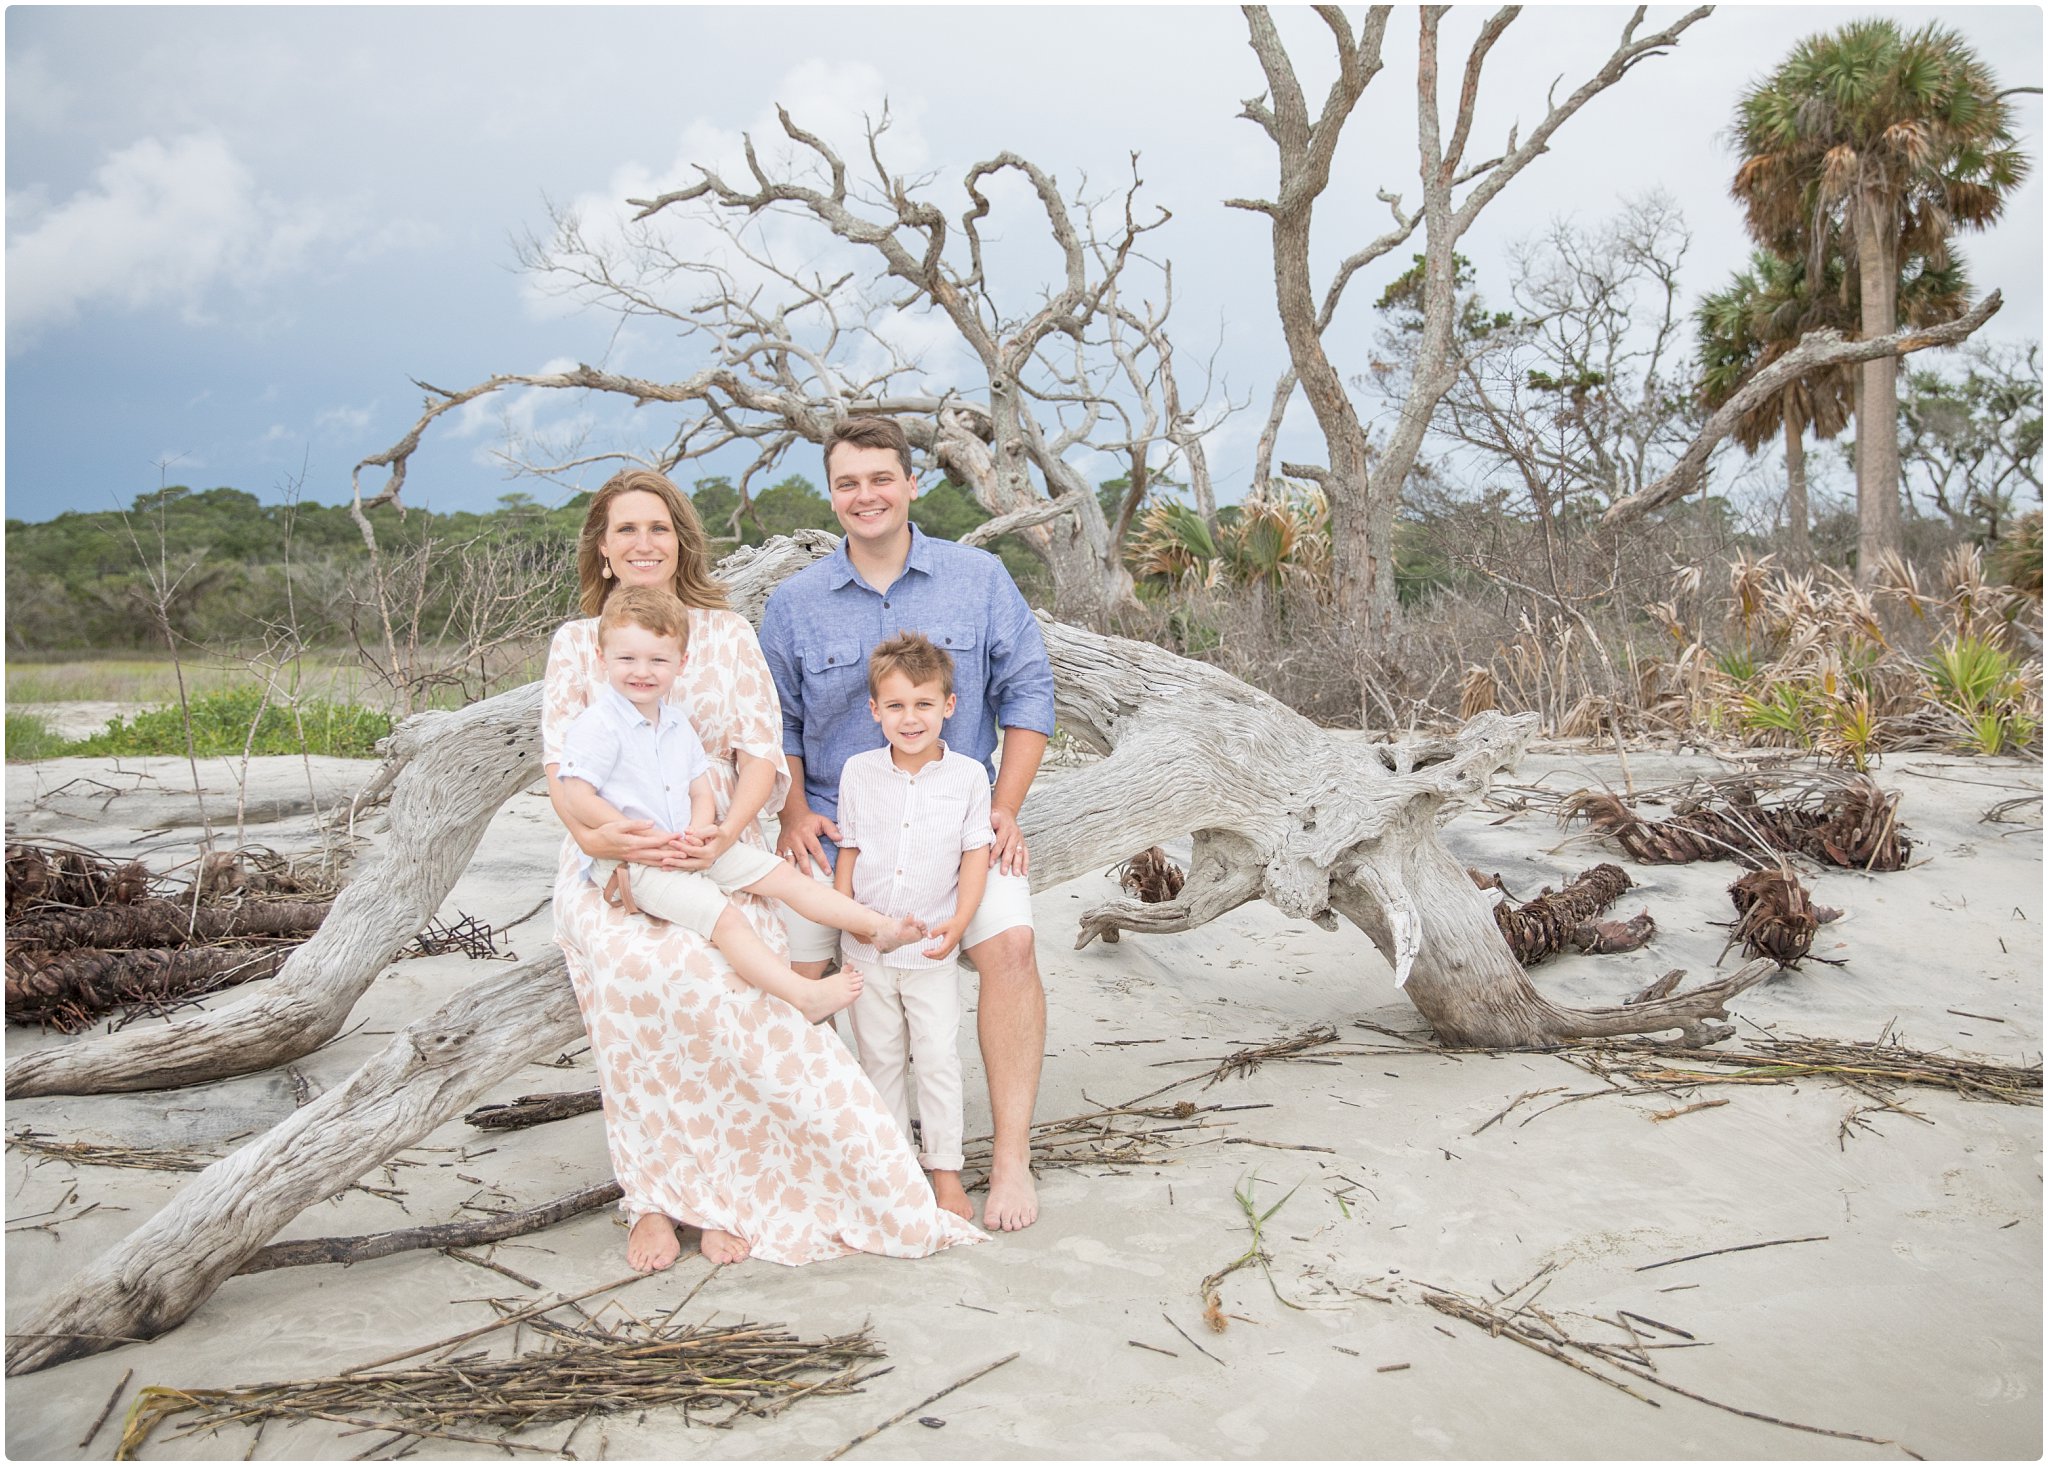 jekyll island family portraits | www.candacehiresphotography.com | candace hires photography